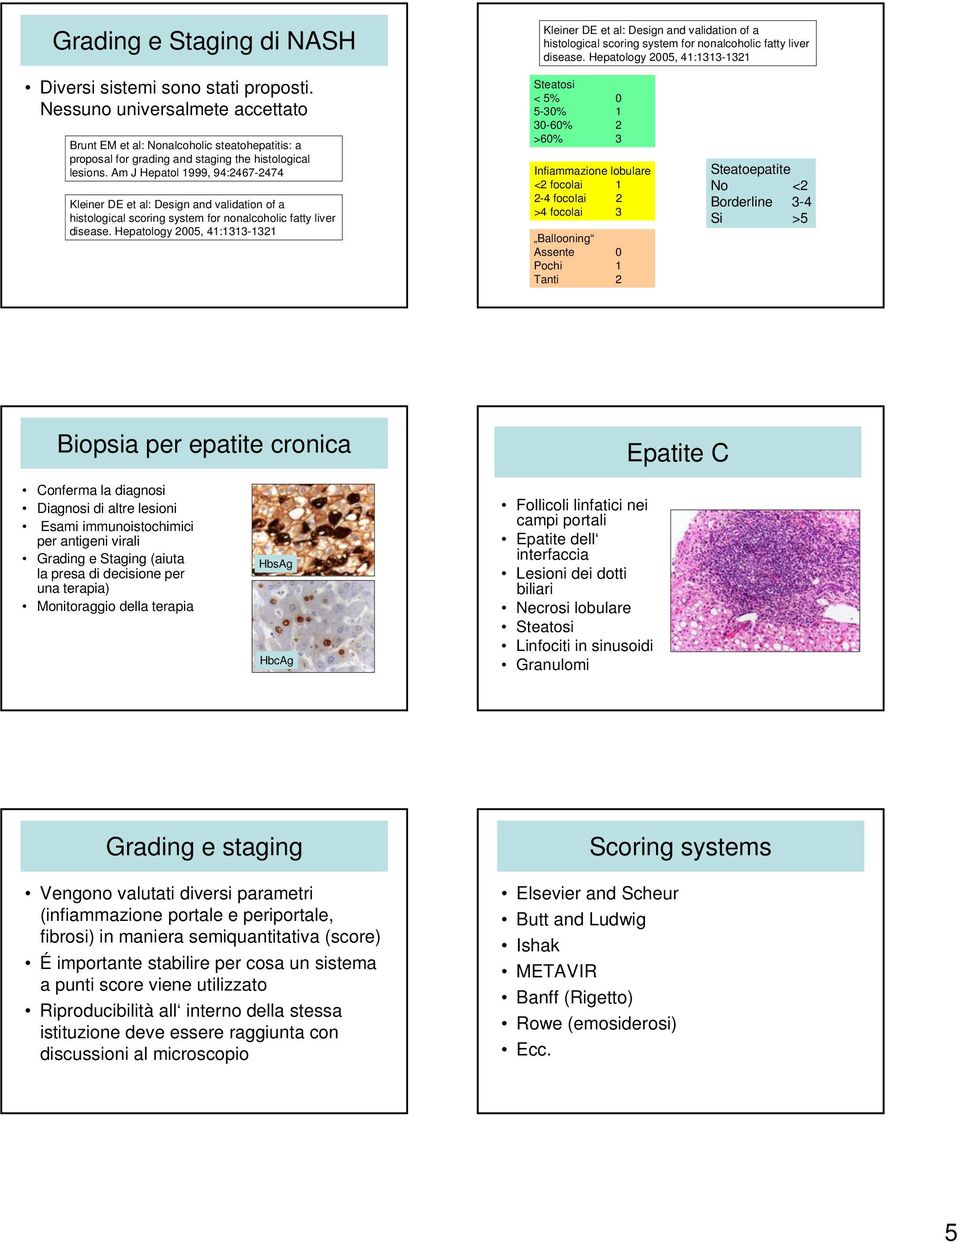 Nessuno universalmete accettato Brunt EM et al: Nonalcoholic steatohepatitis: a proposal for grading and staging the histological lesions.